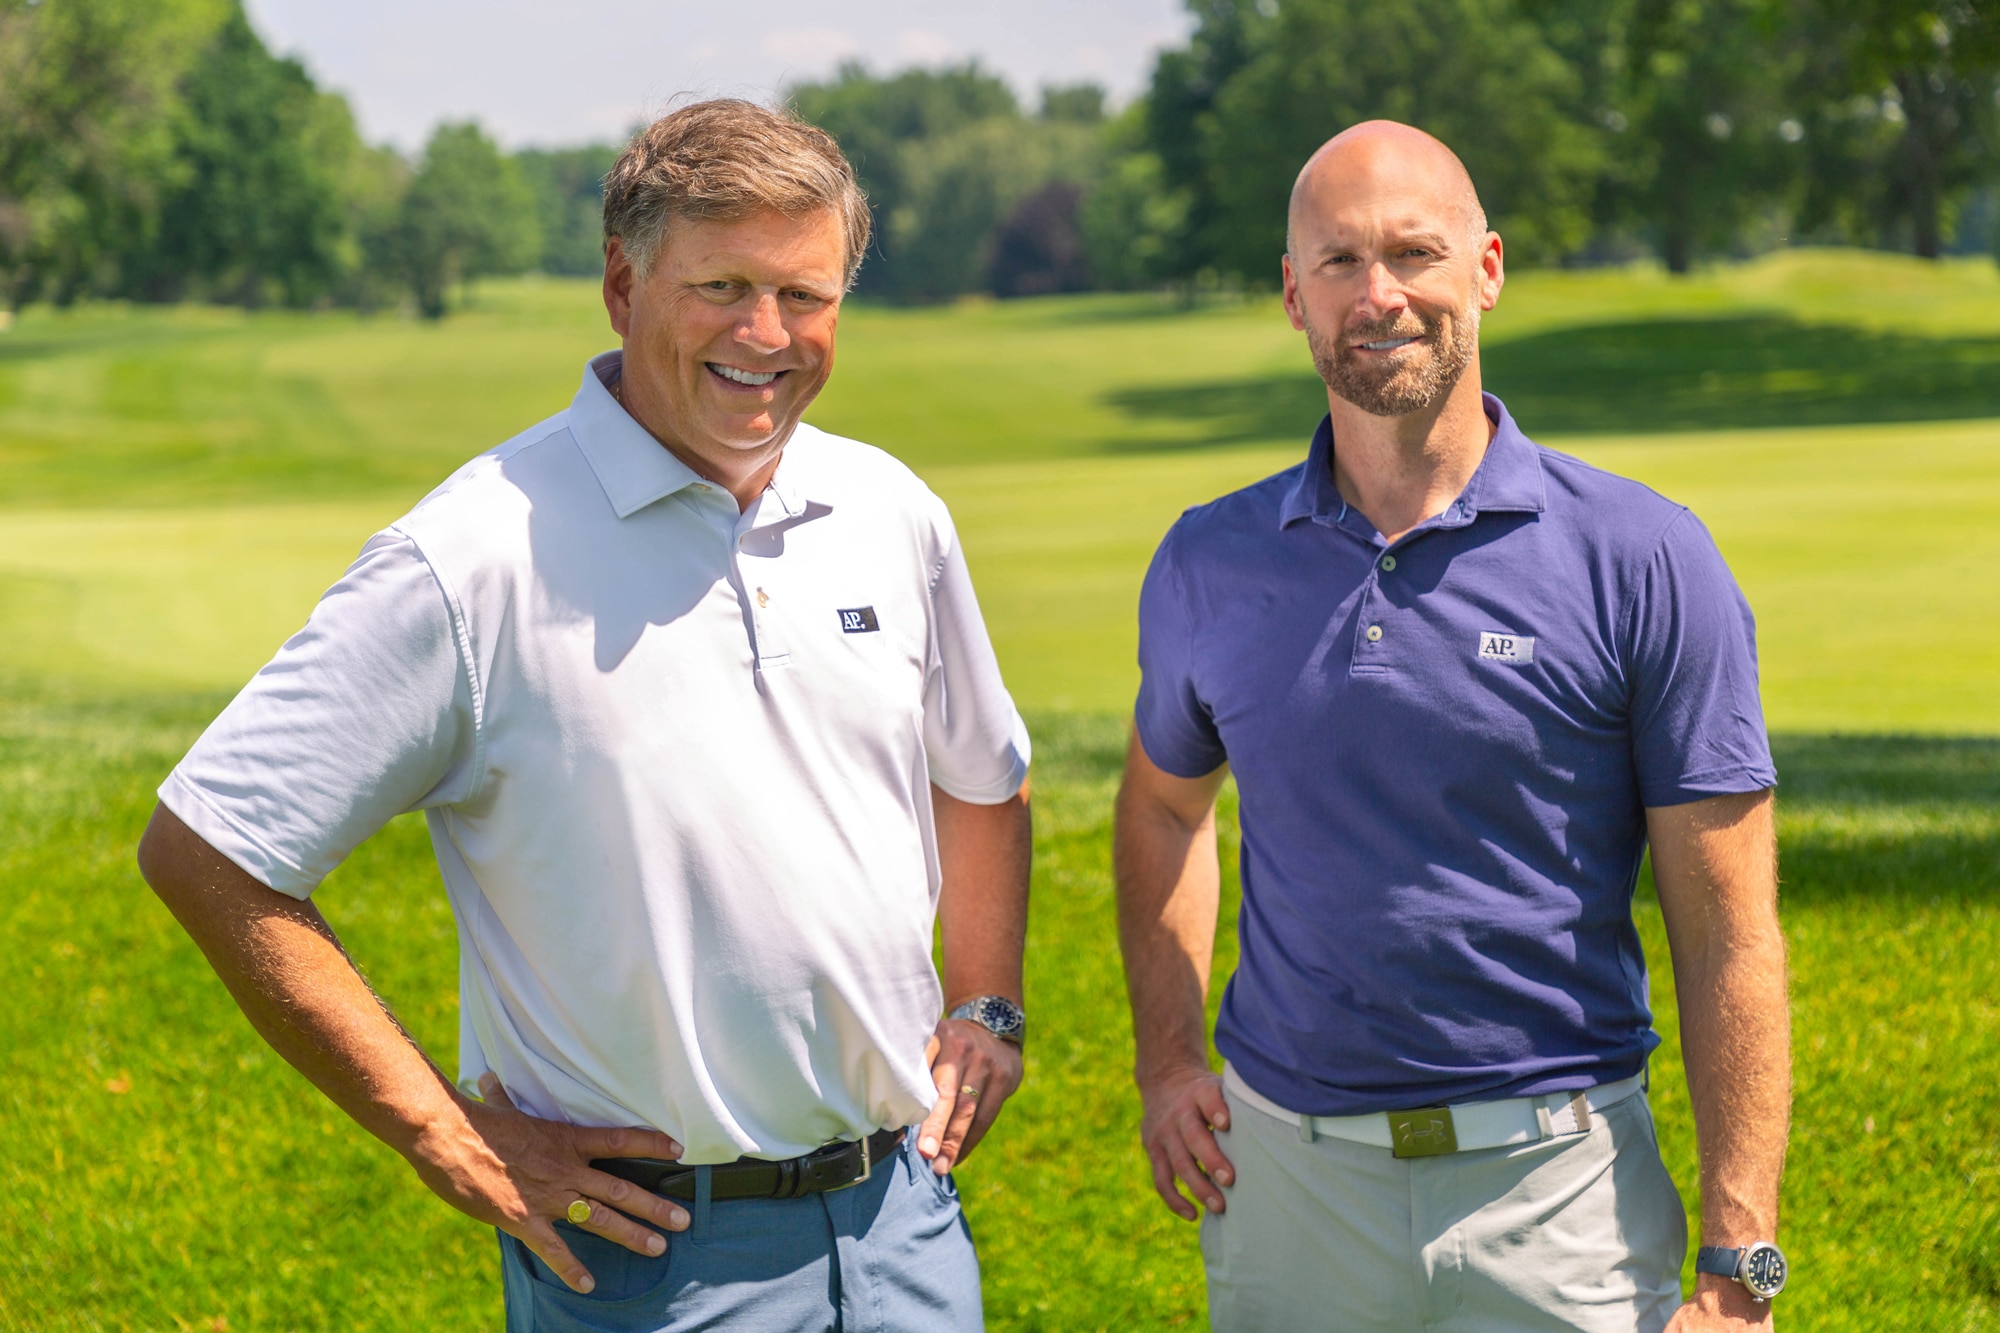 AP Professionals Rochester Founder Mark Pautler and President Matt Taylor on a golf course in Rochester, NY